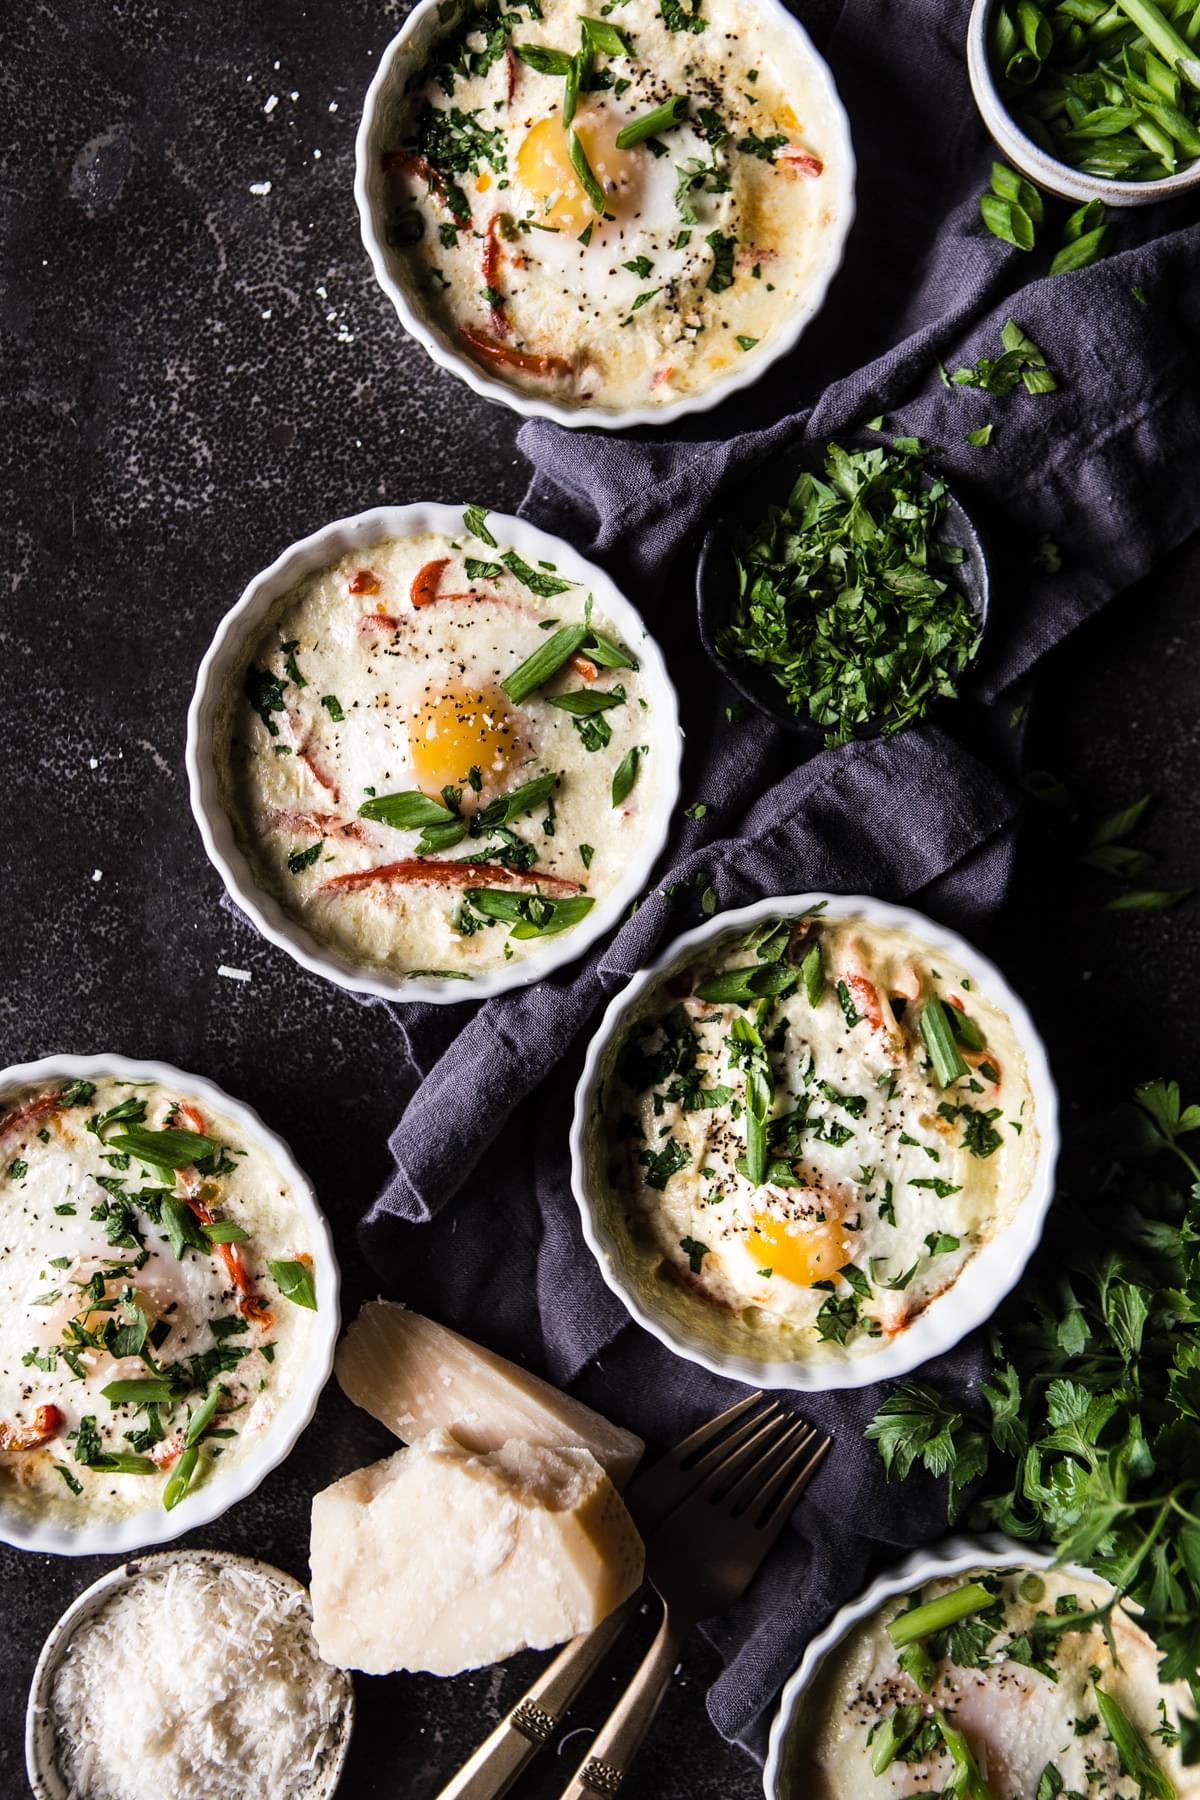 4 ramekins with eggs baked in cream with red bell peppers and leeks